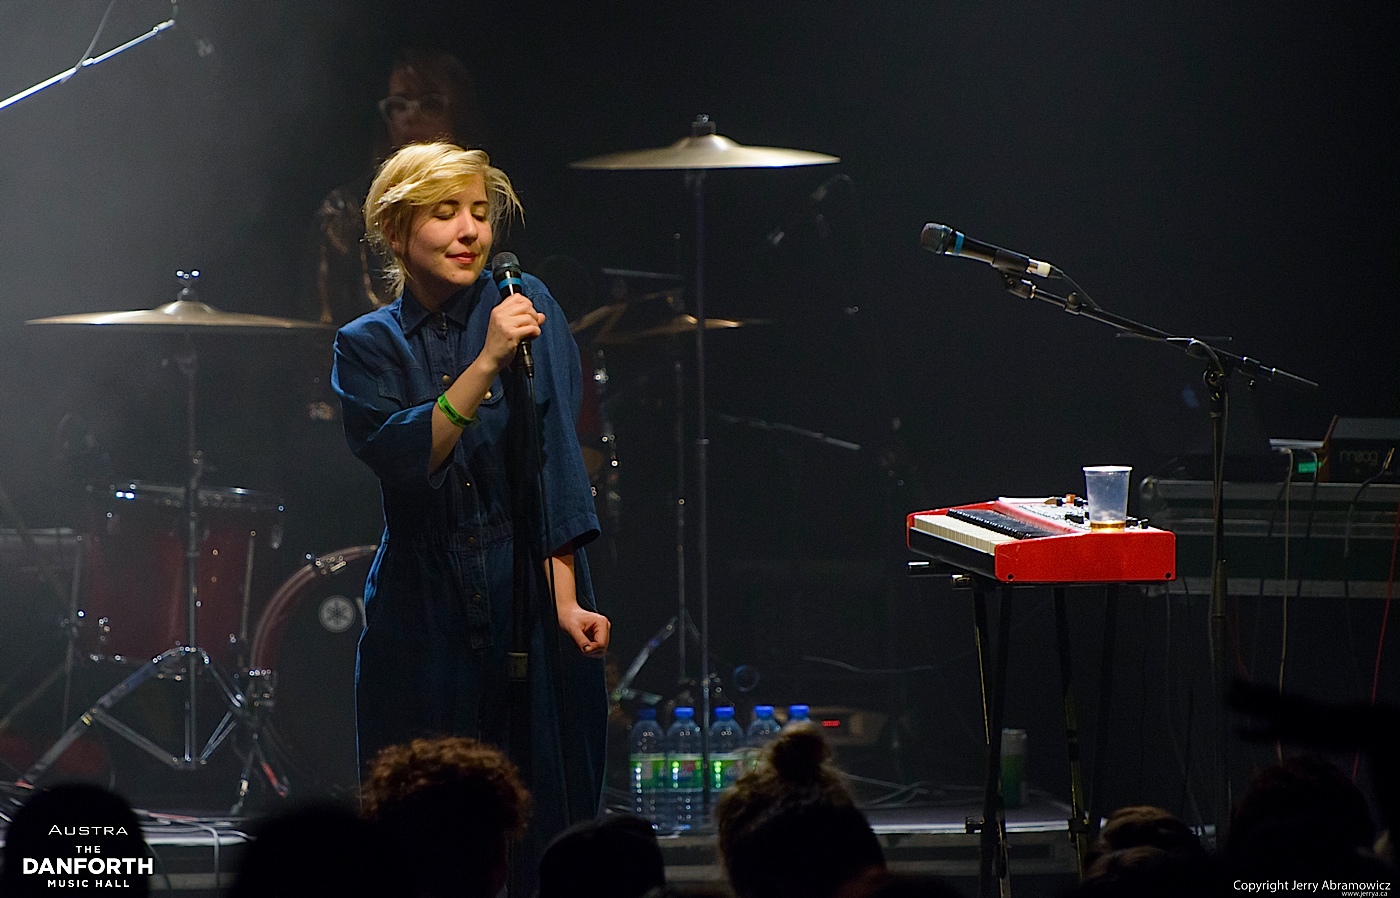 AUSTRA plays to a packed house at The Danforth Music Hall.